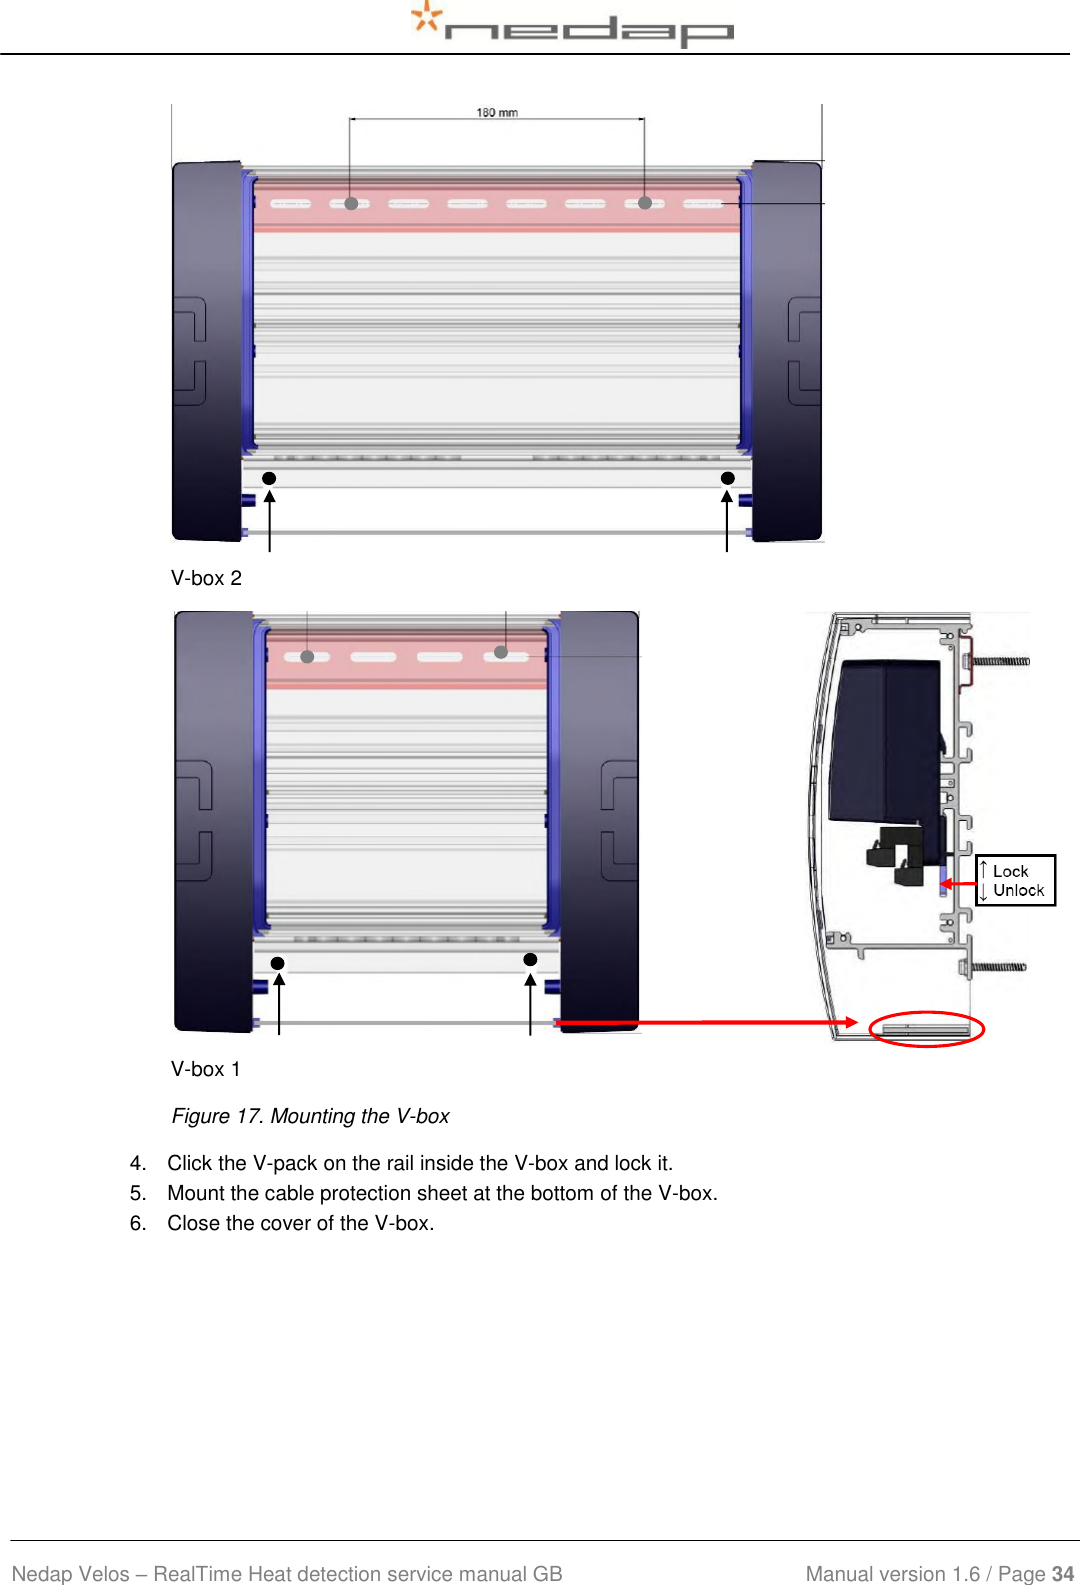  Nedap Velos – RealTime Heat detection service manual GB                            Manual version 1.6 / Page 34   V-box 2  V-box 1  Figure 17. Mounting the V-box 4.  Click the V-pack on the rail inside the V-box and lock it.  5.  Mount the cable protection sheet at the bottom of the V-box. 6.  Close the cover of the V-box.  